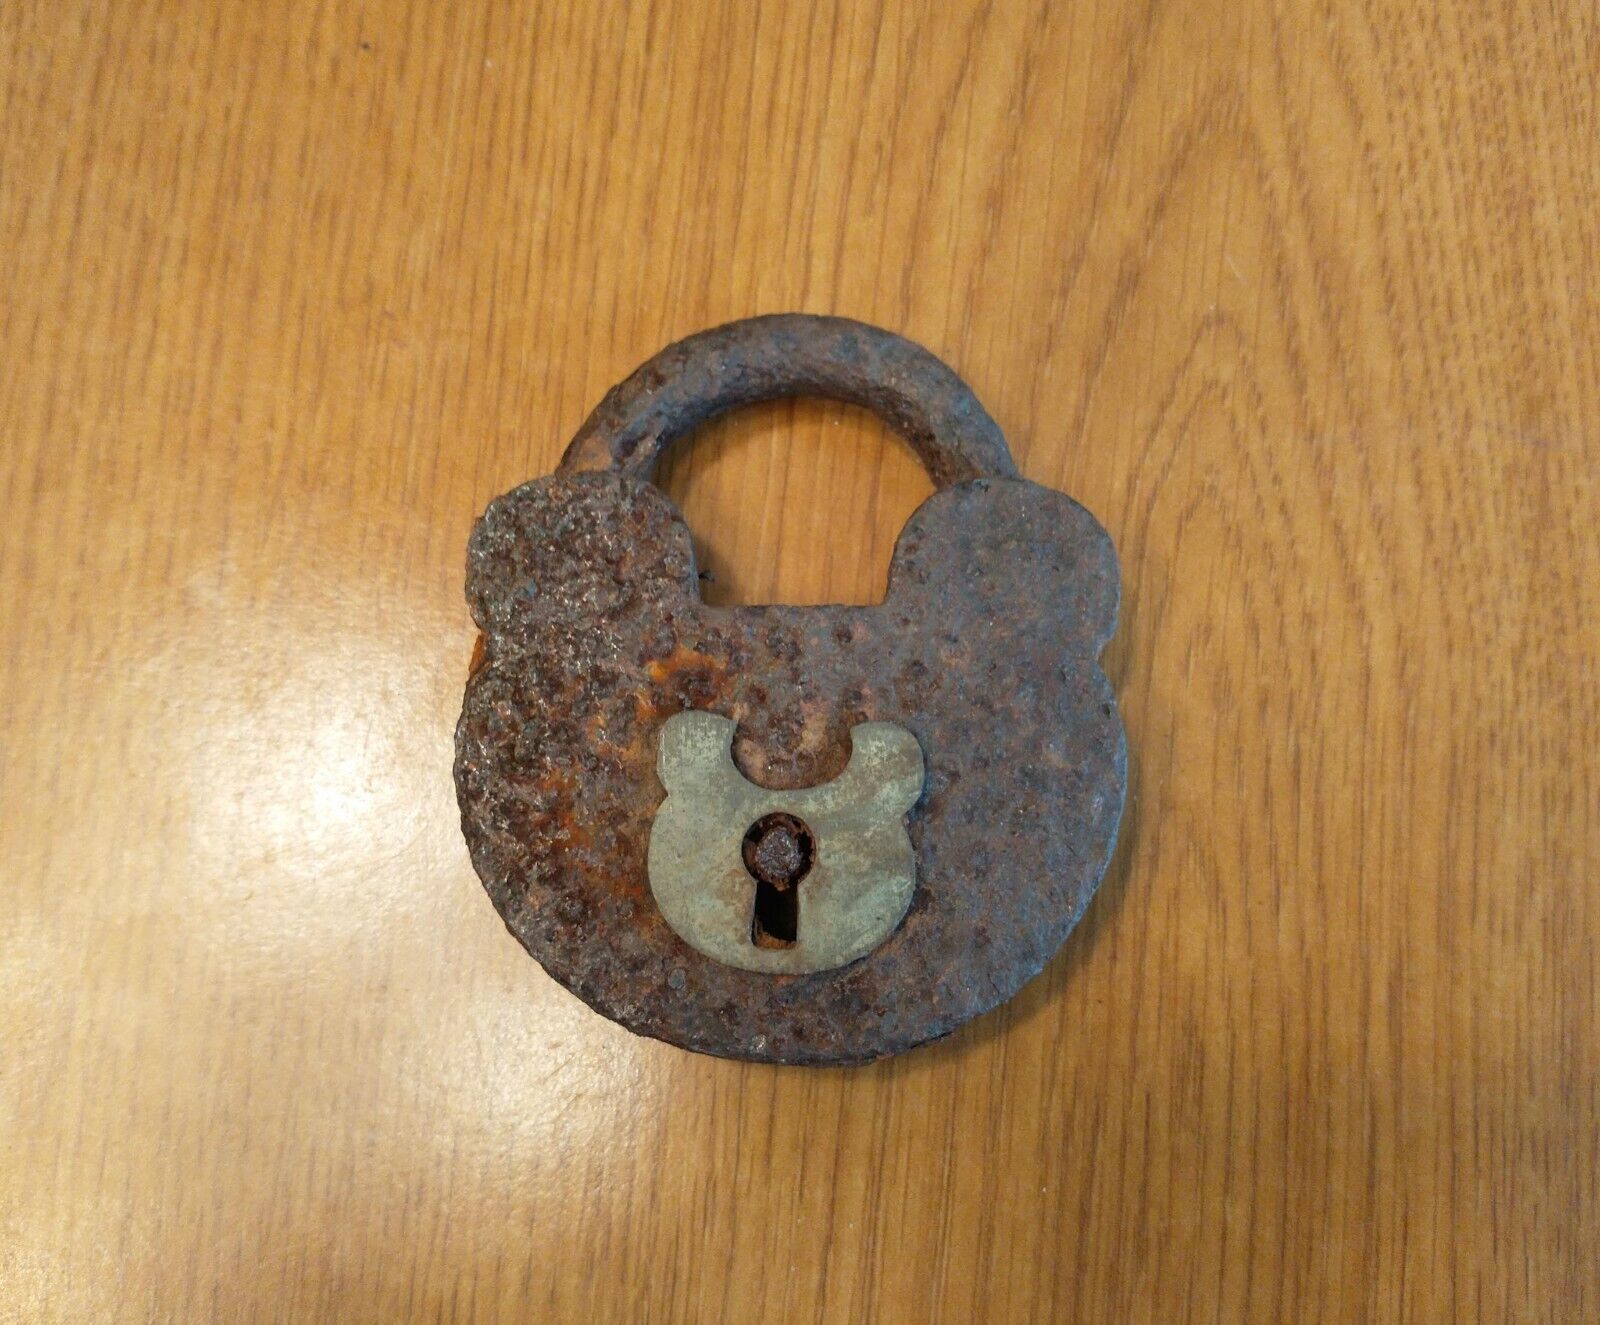 Rare Antique Metal PadLock w Brass Plate Found While Metal Detecting OLD Rusted